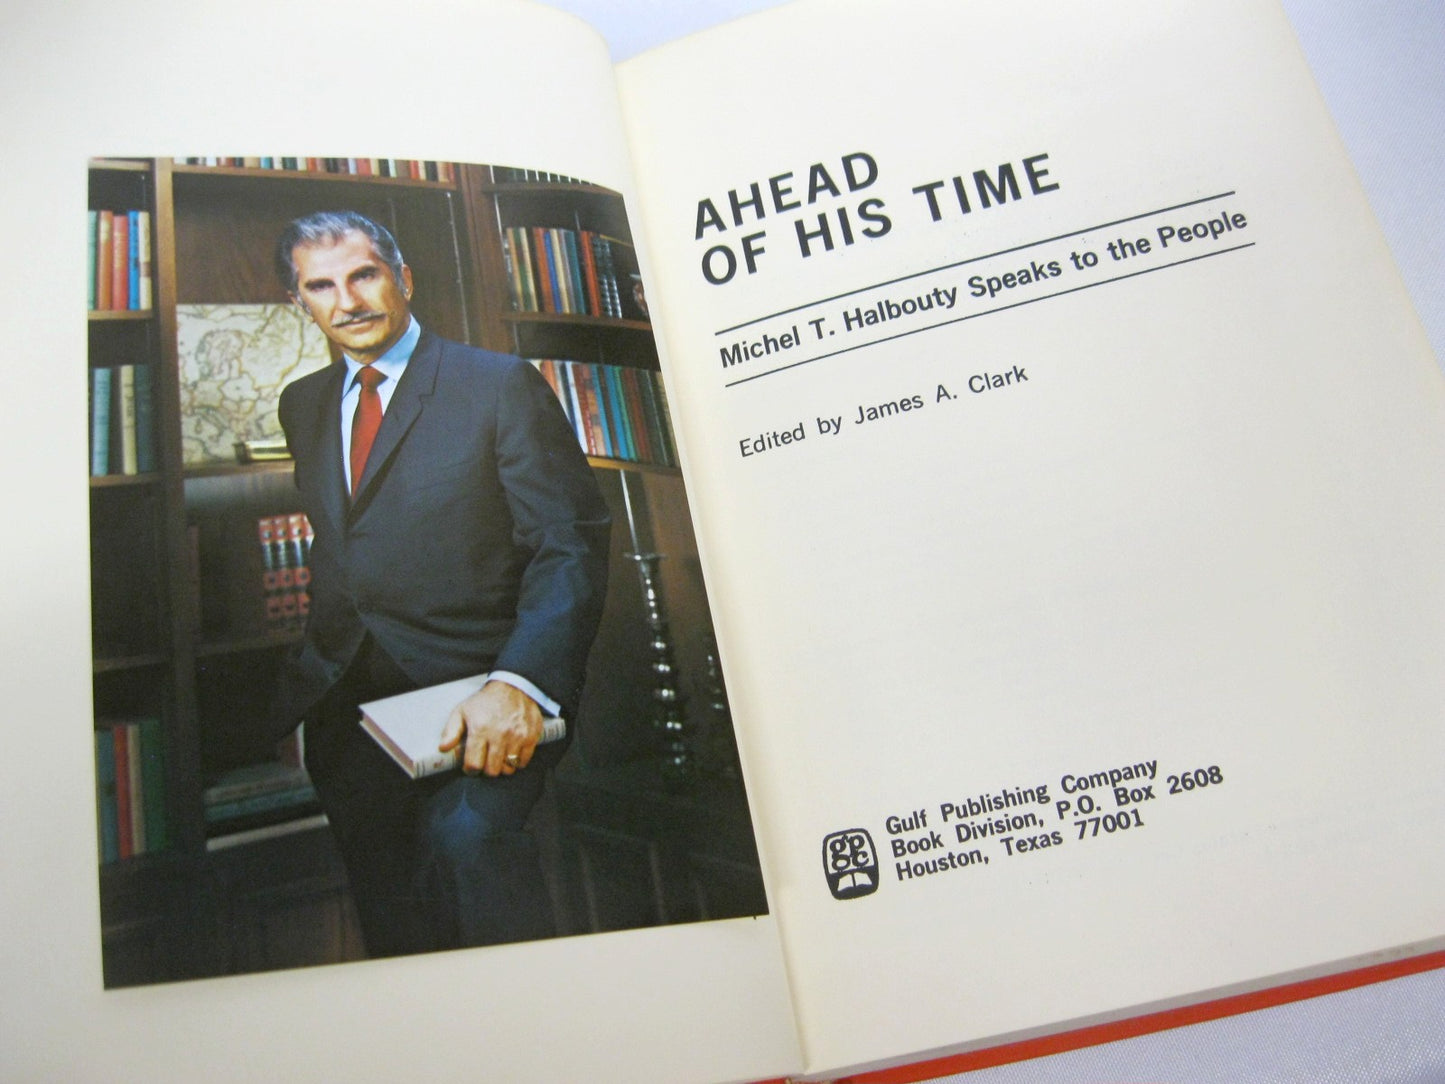 Ahead of His Time: Michel T. Halbouty Speaks to the People edited by James A Clark